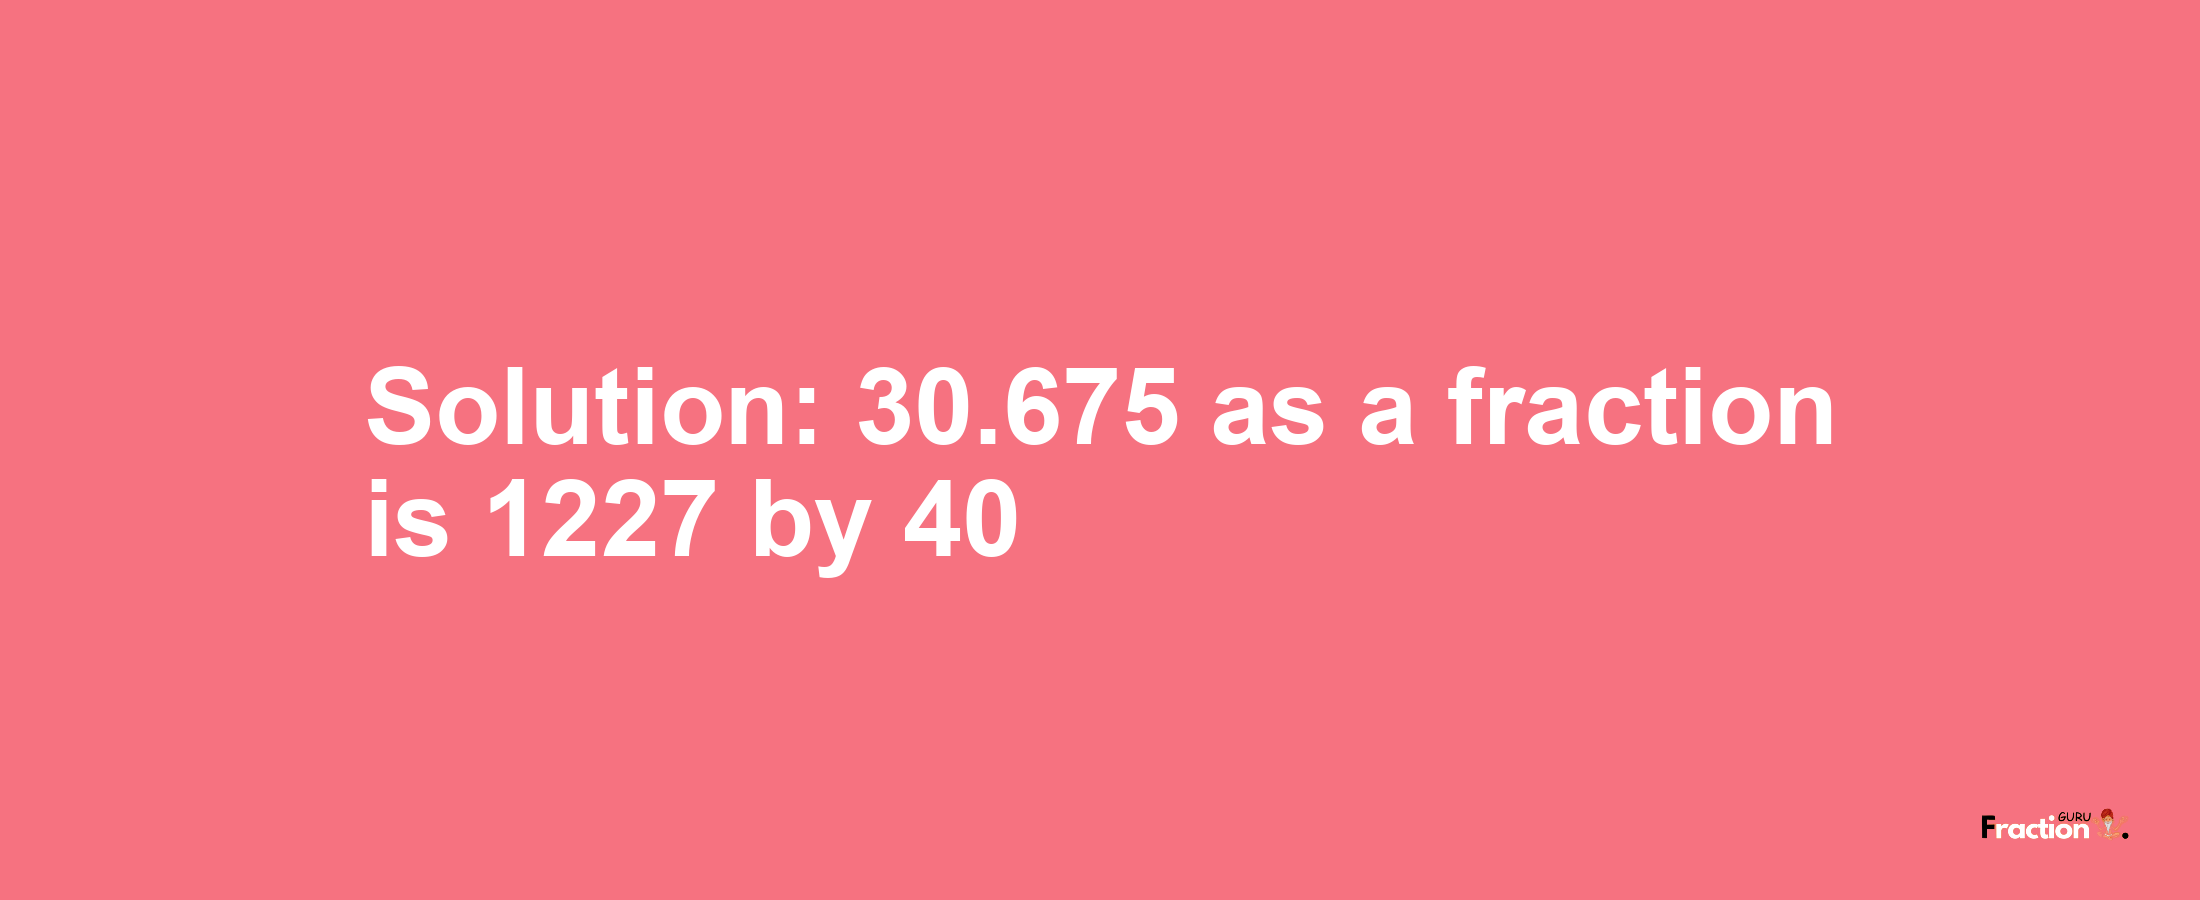 Solution:30.675 as a fraction is 1227/40